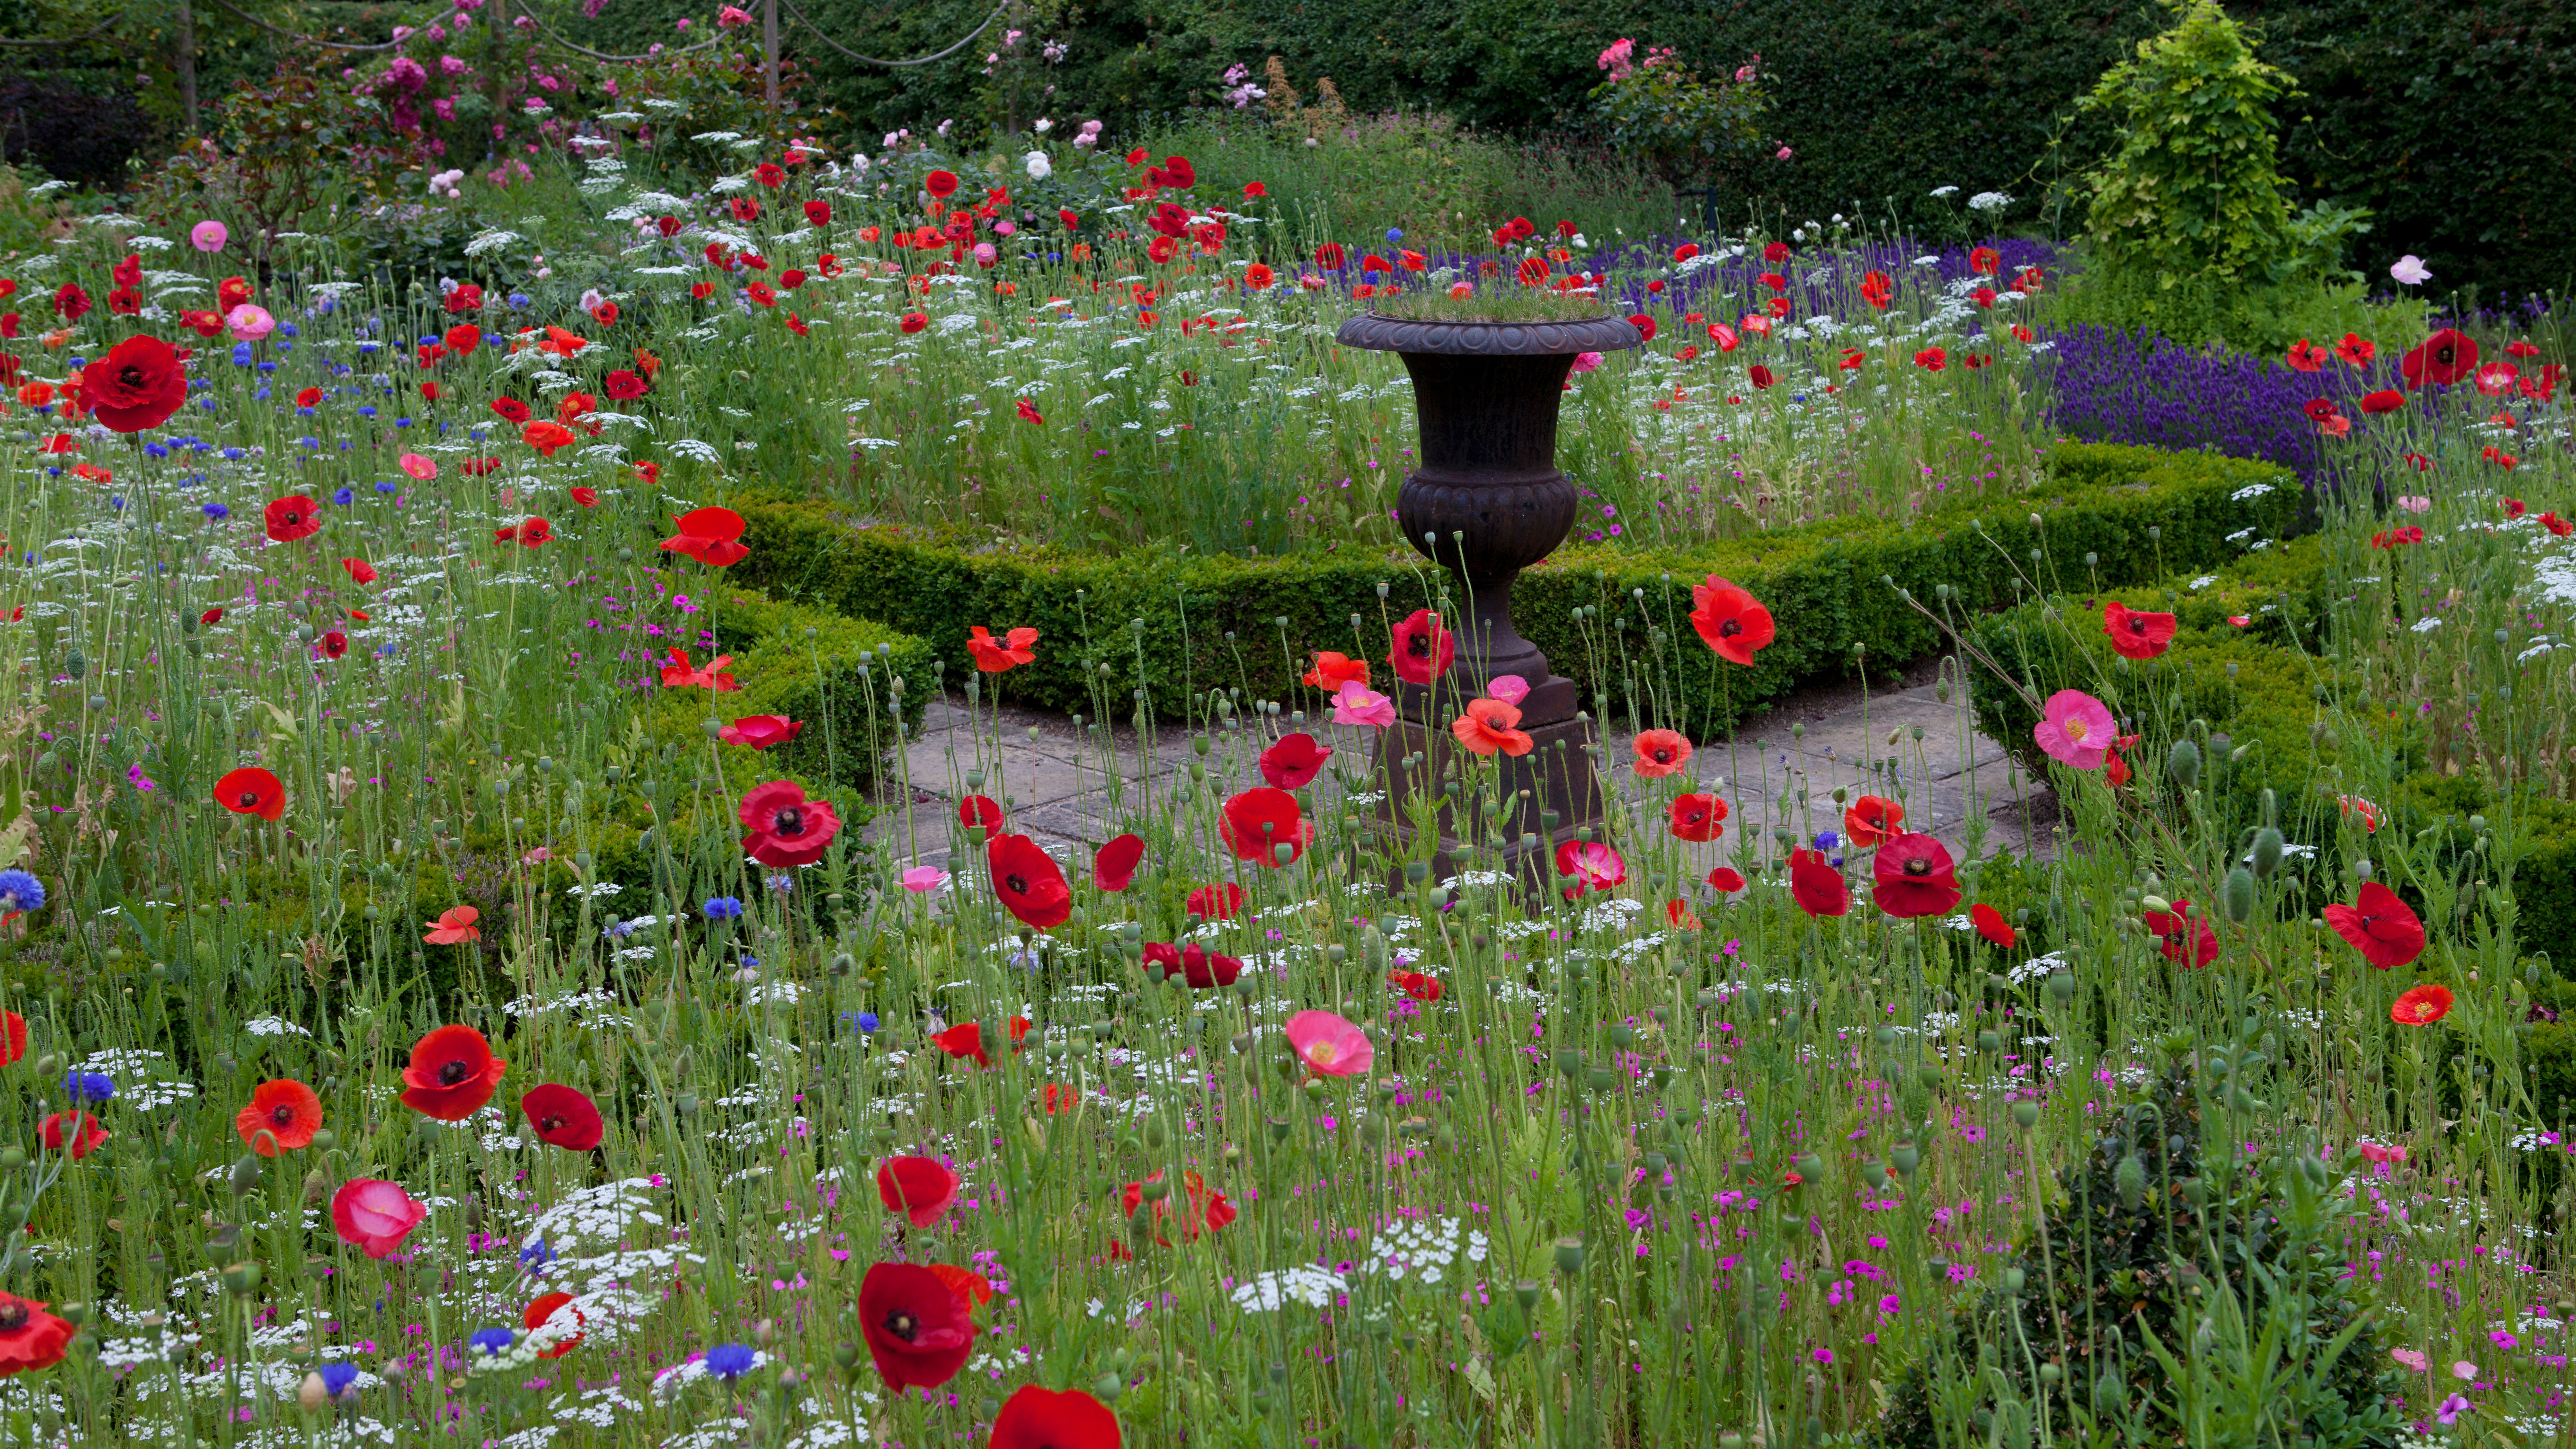 12 Types of Wildflowers for Summer Gardens